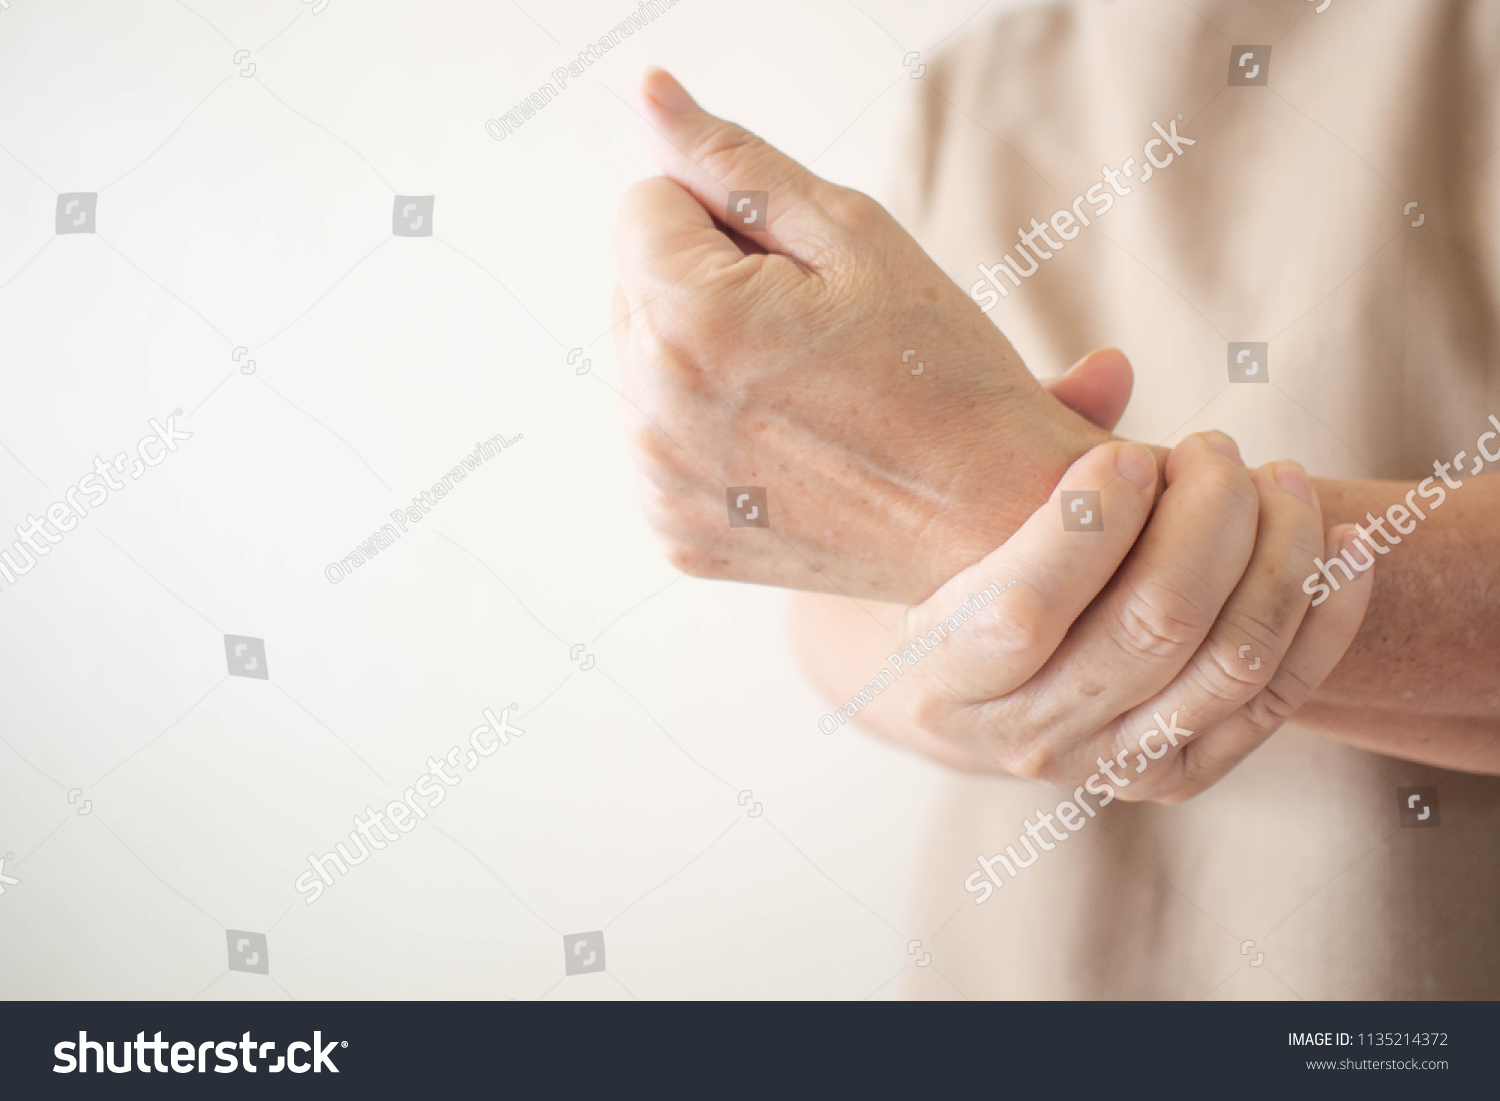 Elderly woman suffering from pain, weakness and tingling in wrist. Causes of hurt include osteoarthritis, rheumatoid arthritis, gout or wrist sprain. Health care concept. Copy space. #1135214372